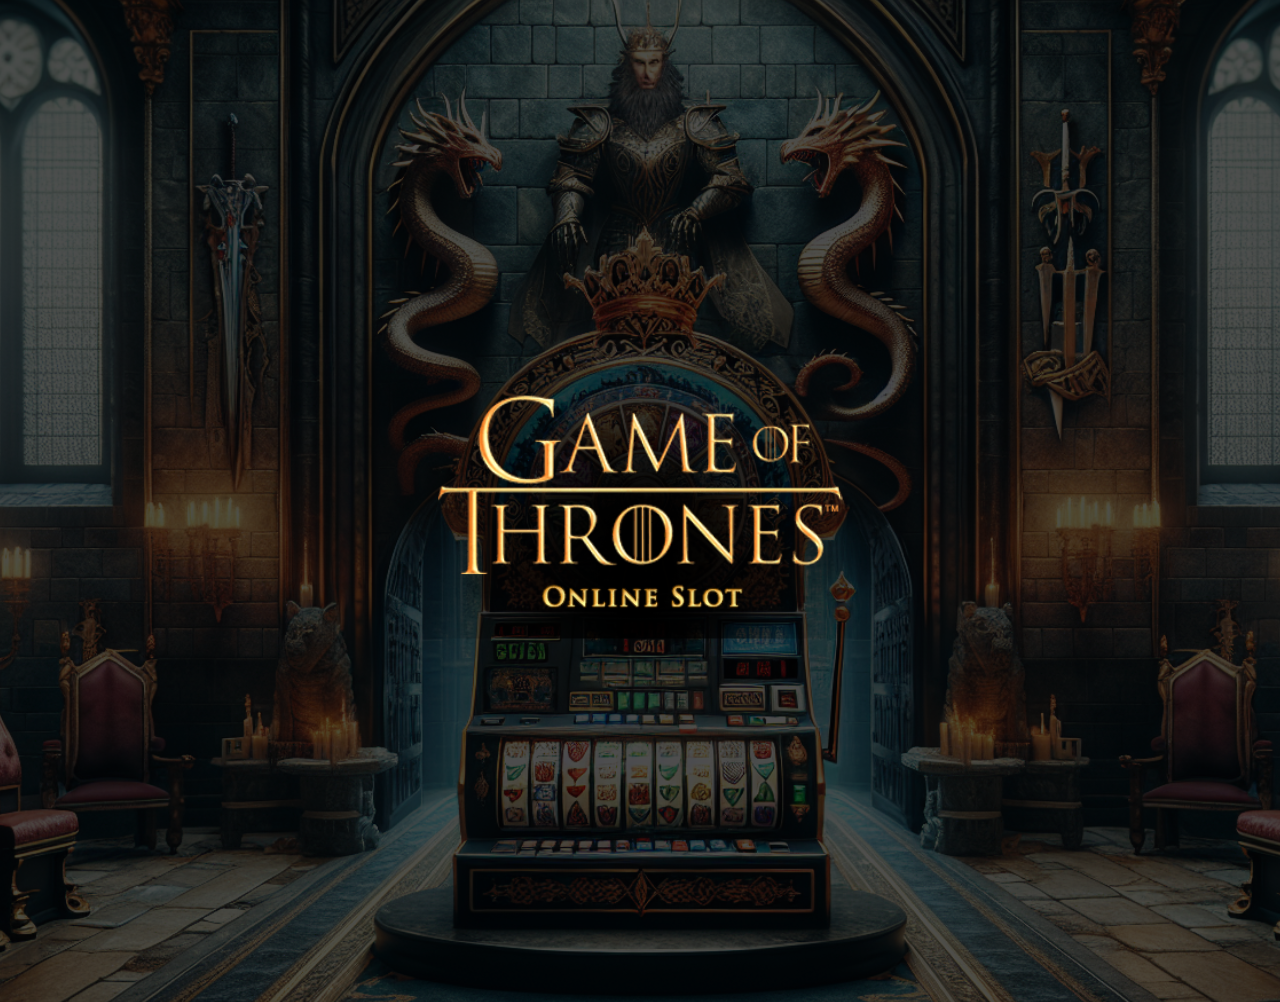 Game of Thrones Slot Not On Gamstop